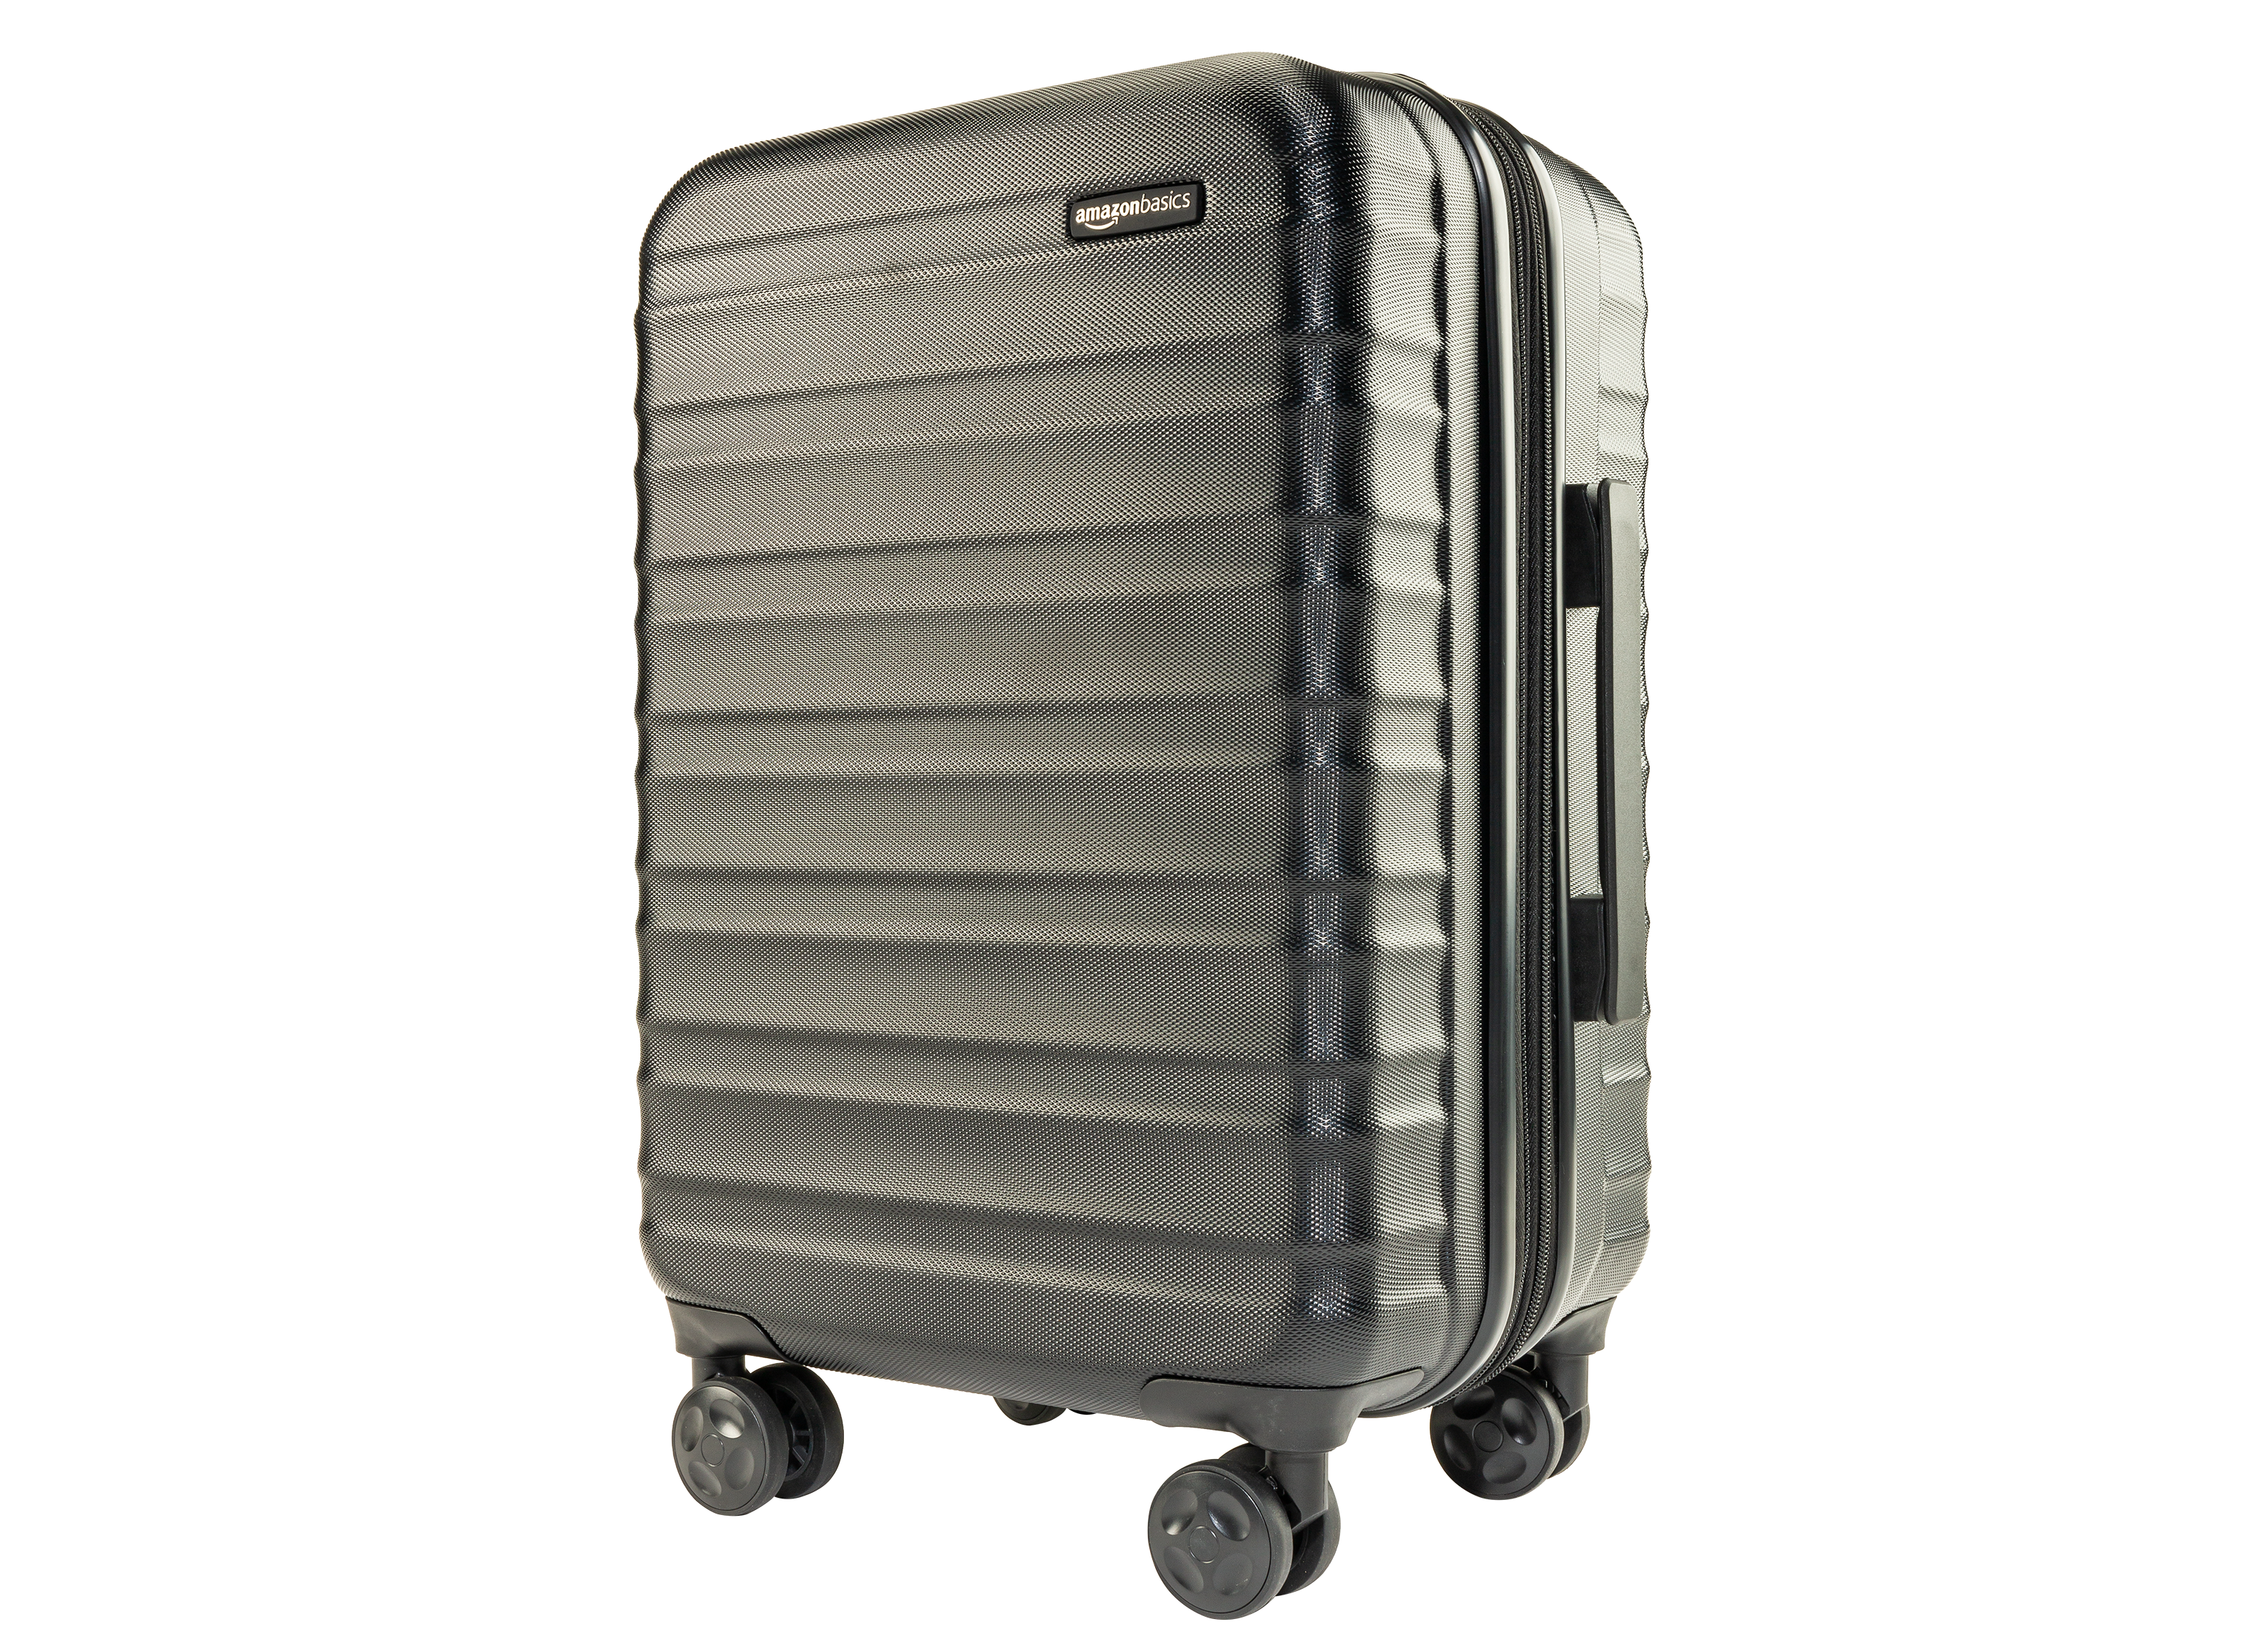 Basics 21-Inch Hardside Spinner Luggage Review - Consumer Reports